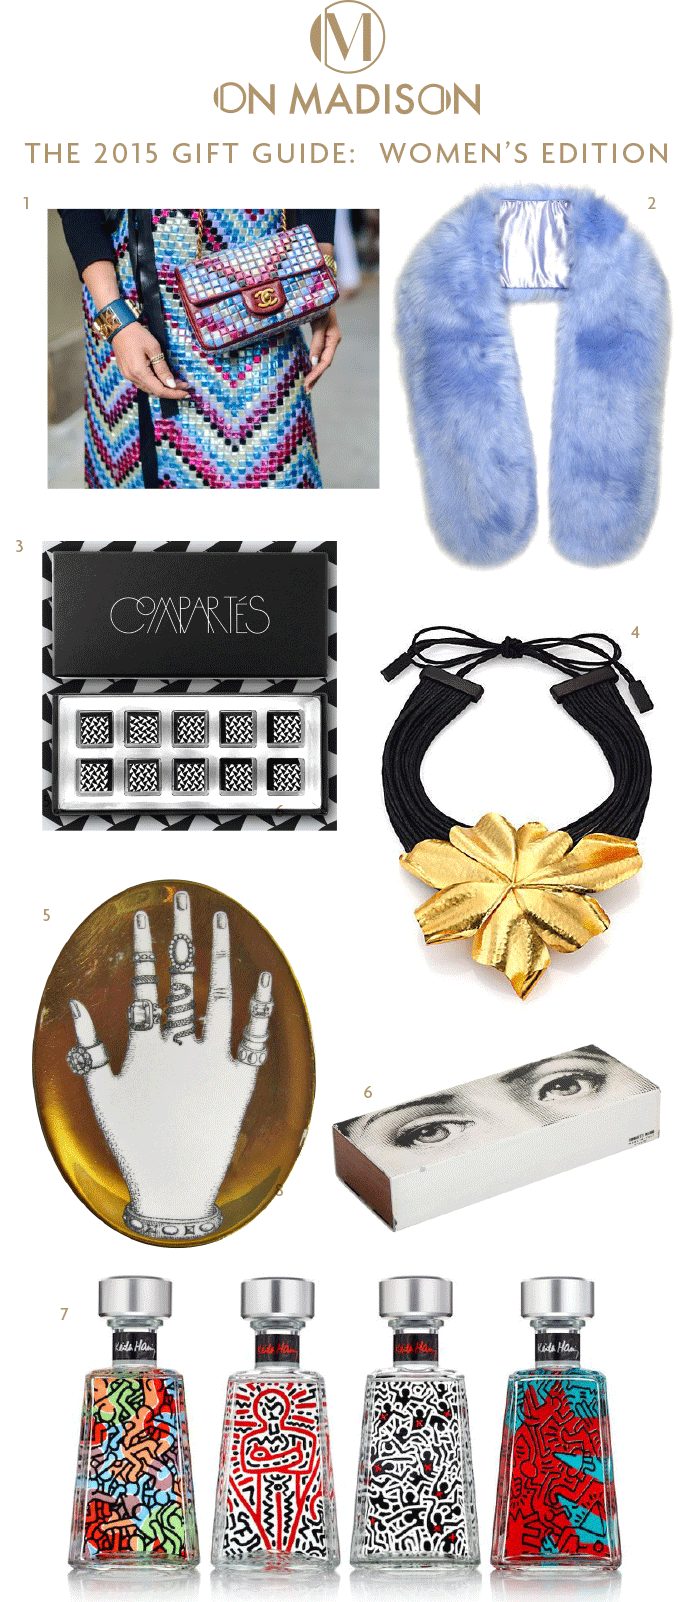 On Madison's Gift Guide for Women